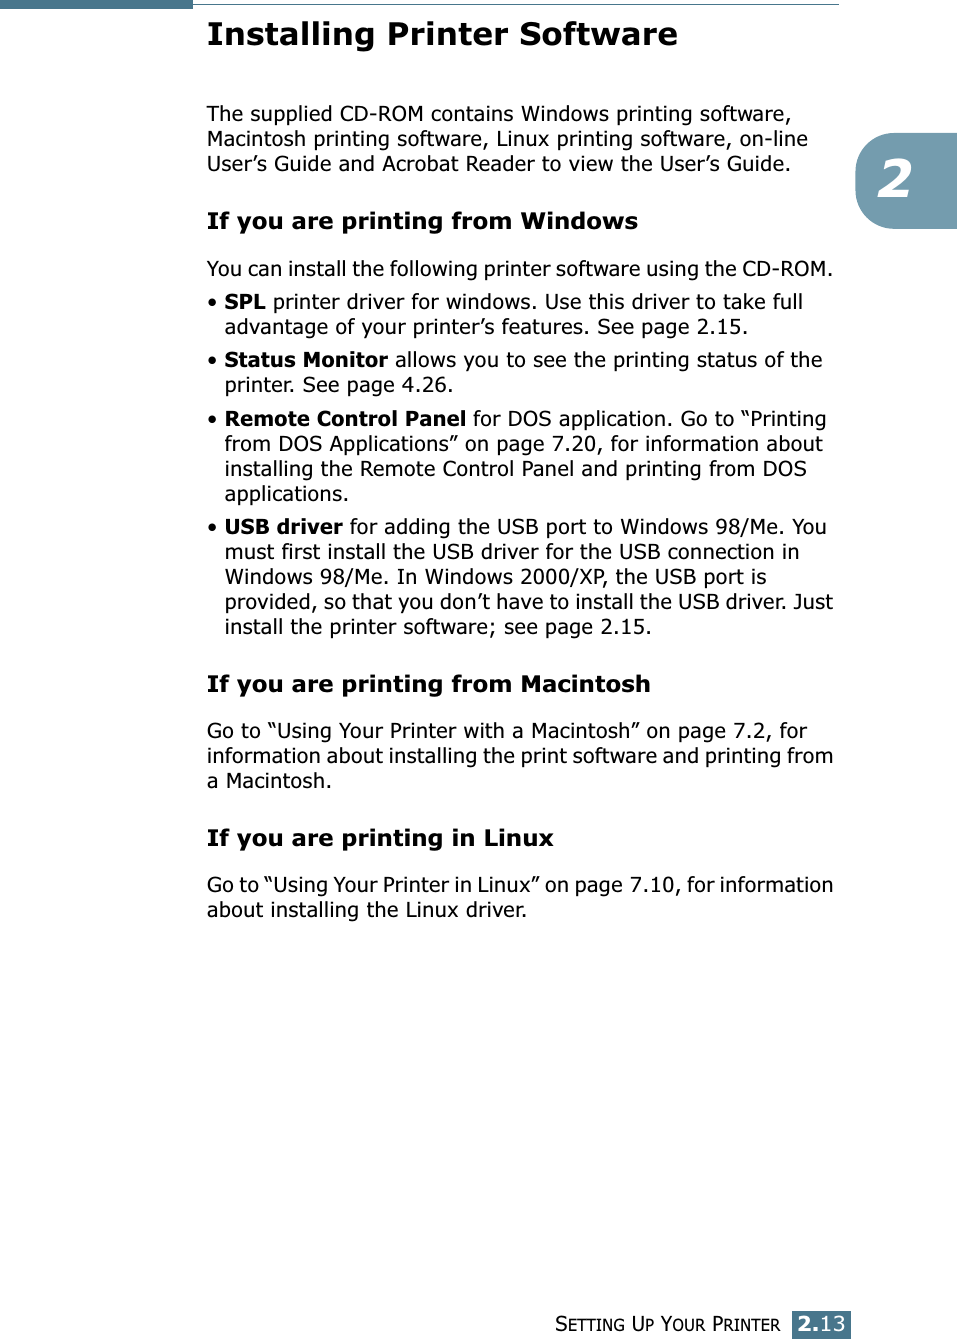 SETTING UP YOUR PRINTER2.132Installing Printer SoftwareThe supplied CD-ROM contains Windows printing software, Macintosh printing software, Linux printing software, on-line User’s Guide and Acrobat Reader to view the User’s Guide. If you are printing from WindowsYou can install the following printer software using the CD-ROM. • SPL printer driver for windows. Use this driver to take full advantage of your printer’s features. See page 2.15.• Status Monitor allows you to see the printing status of the printer. See page 4.26.• Remote Control Panel for DOS application. Go to “Printing from DOS Applications” on page 7.20, for information about installing the Remote Control Panel and printing from DOS applications. • USB driver for adding the USB port to Windows 98/Me. You must first install the USB driver for the USB connection in Windows 98/Me. In Windows 2000/XP, the USB port is provided, so that you don’t have to install the USB driver. Just install the printer software; see page 2.15. If you are printing from MacintoshGo to “Using Your Printer with a Macintosh” on page 7.2, for information about installing the print software and printing from a Macintosh.If you are printing in LinuxGo to “Using Your Printer in Linux” on page 7.10, for information about installing the Linux driver.